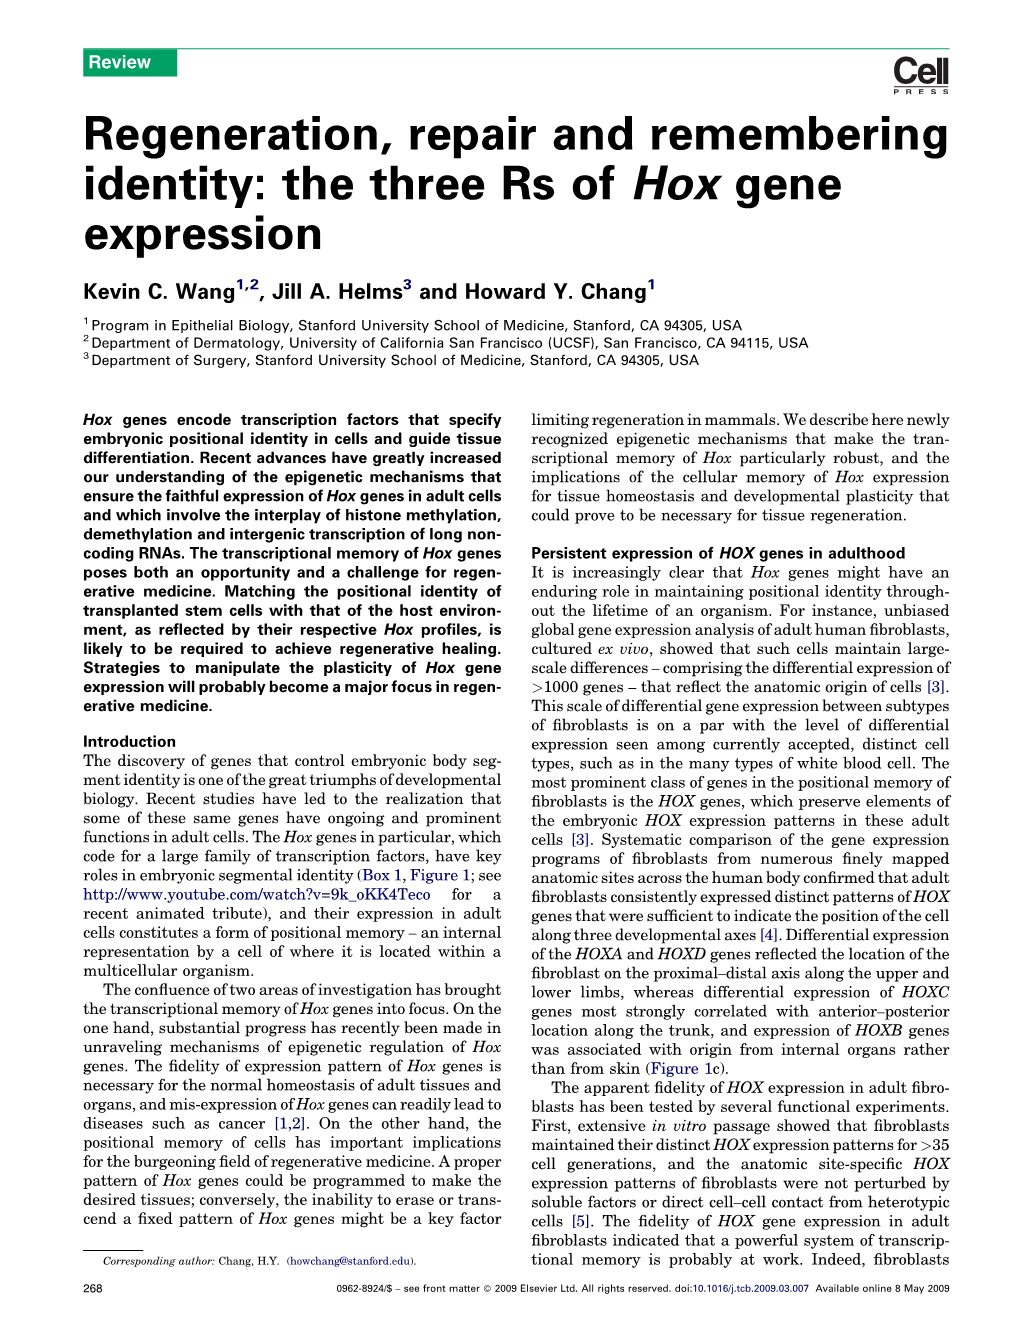 The Three Rs of Hox Gene Expression